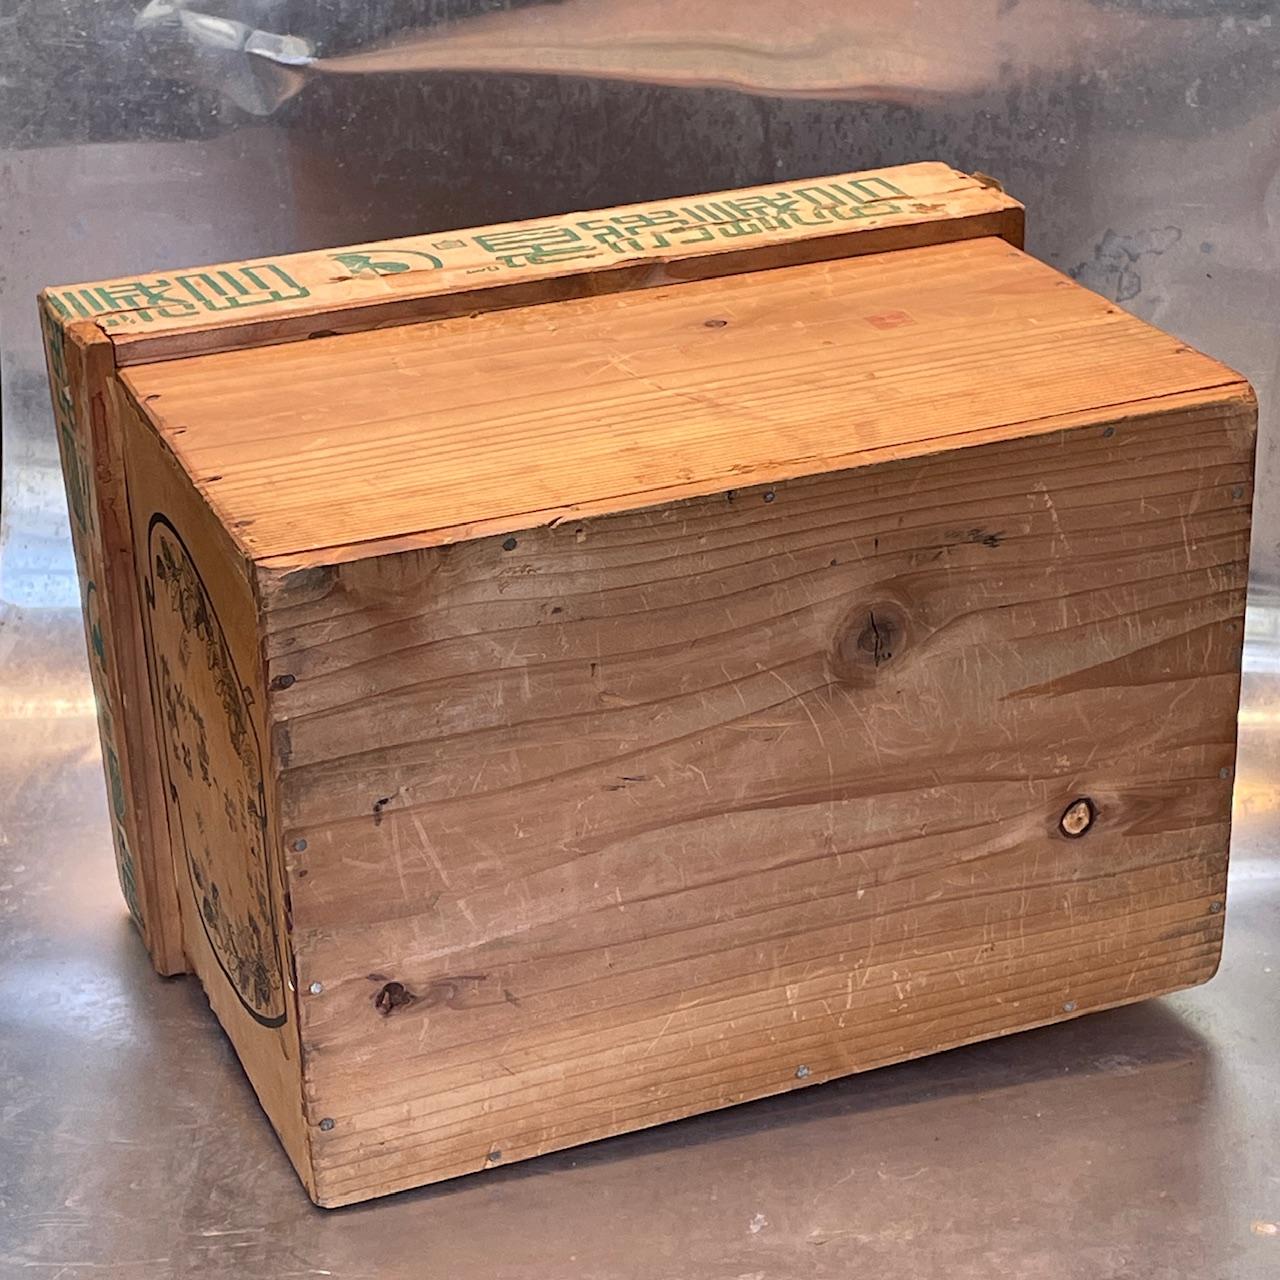 Vintage Balsa Wood and Tin Lined Tea Box Workshop Prop Decor Storage In Fair Condition For Sale In Hyattsville, MD